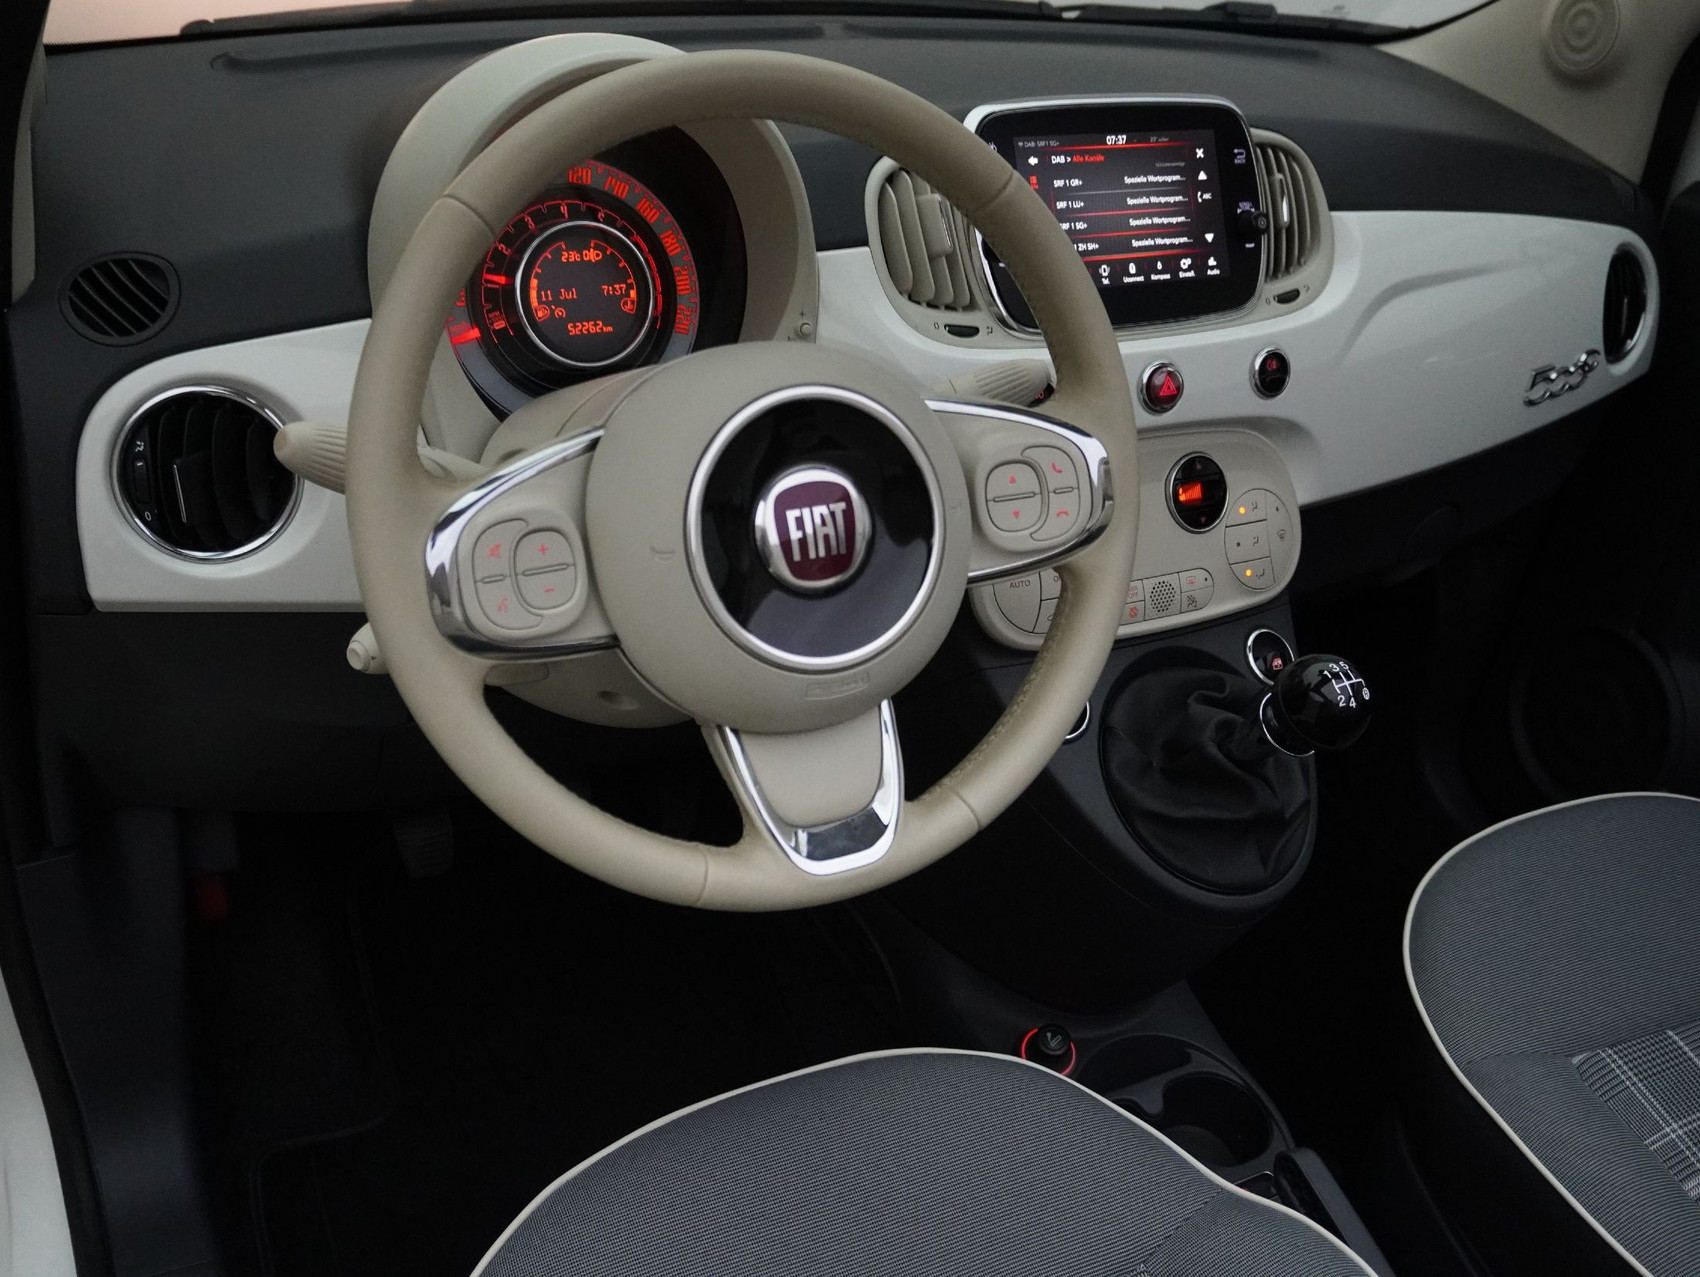 FIAT 500 0.9 T TwinAir Lounge Cabriolet